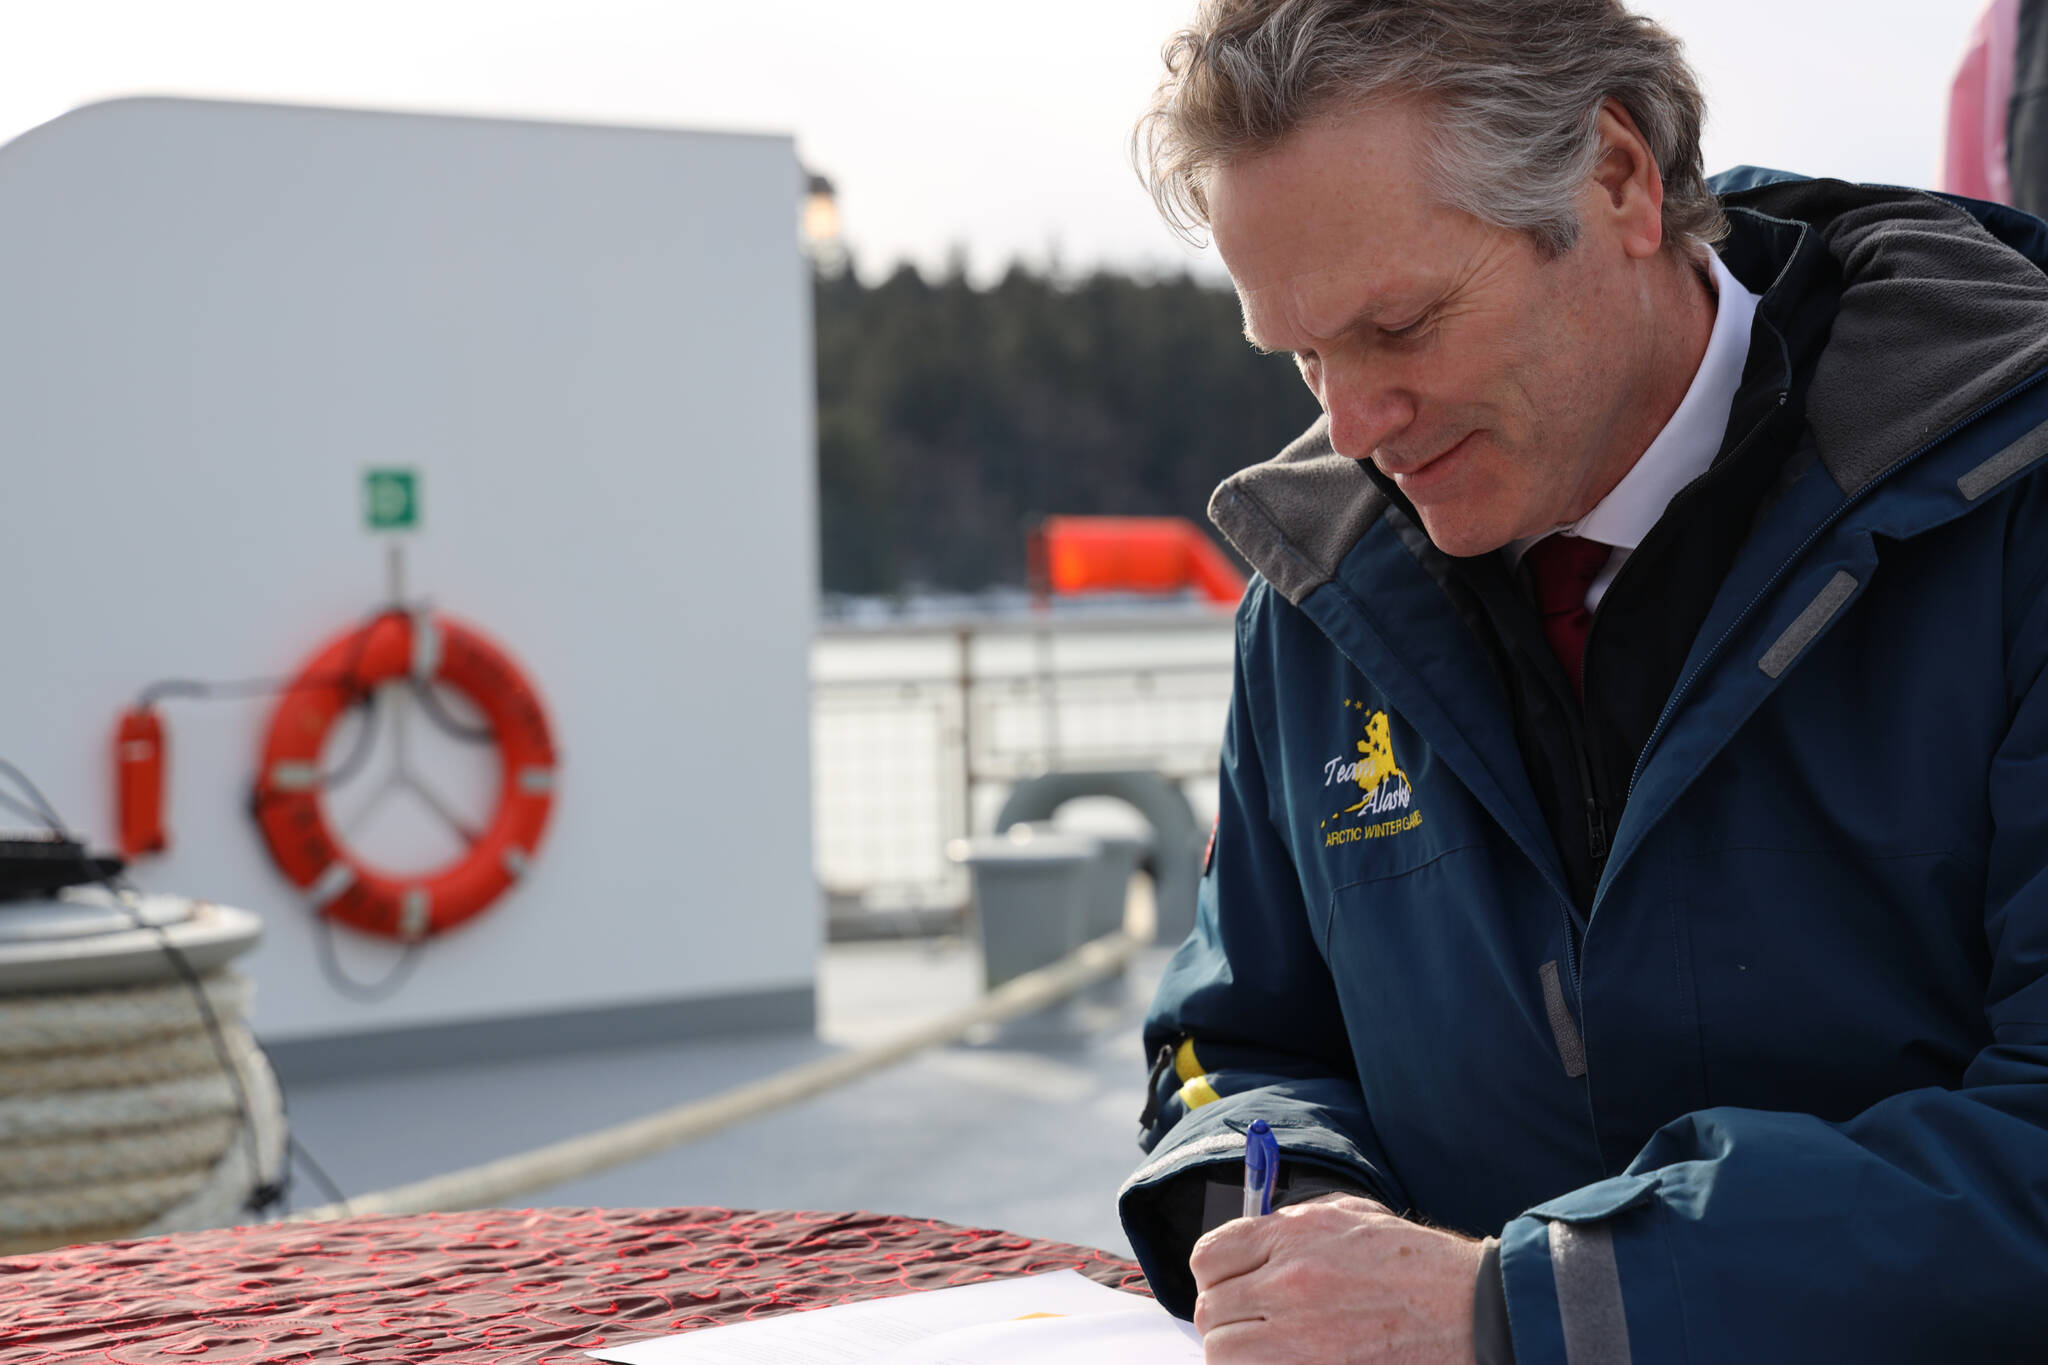 Gov. Mike Dunleavy signs a memorandum of understanding Thursday afternoon between the Alaska Department of Transportation and Public Facilities and Goldbelt Inc. to pursue engineering and design services to determine whether it’s feasible to build a new ferry terminal facility in Juneau at Cascade Point. (Clarise Larson / Juneau Empire)